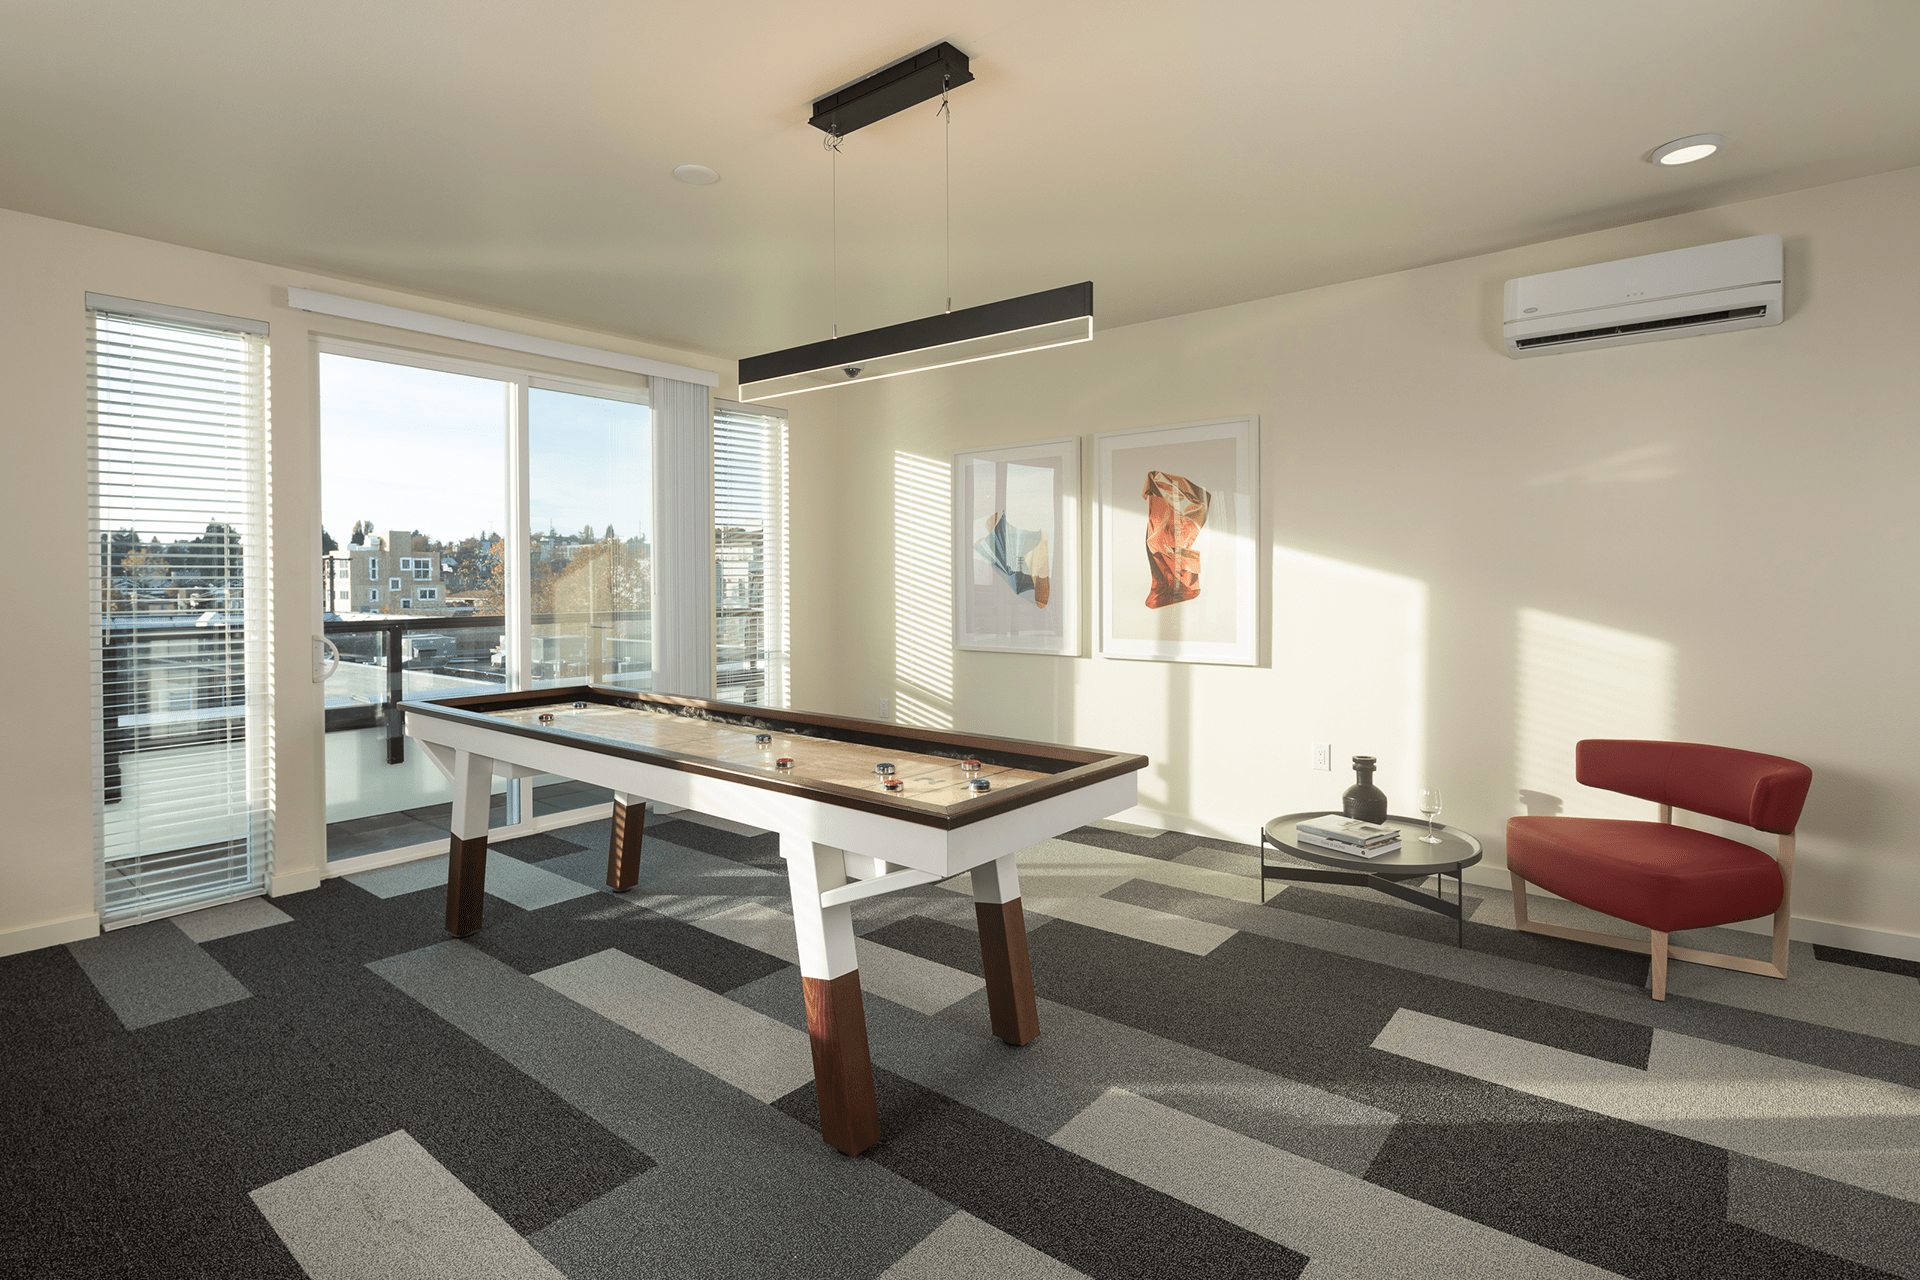 An interior community space at the Roosevelt Apartments features a geographic gray floor, tall windows, and a shuffleboard table.